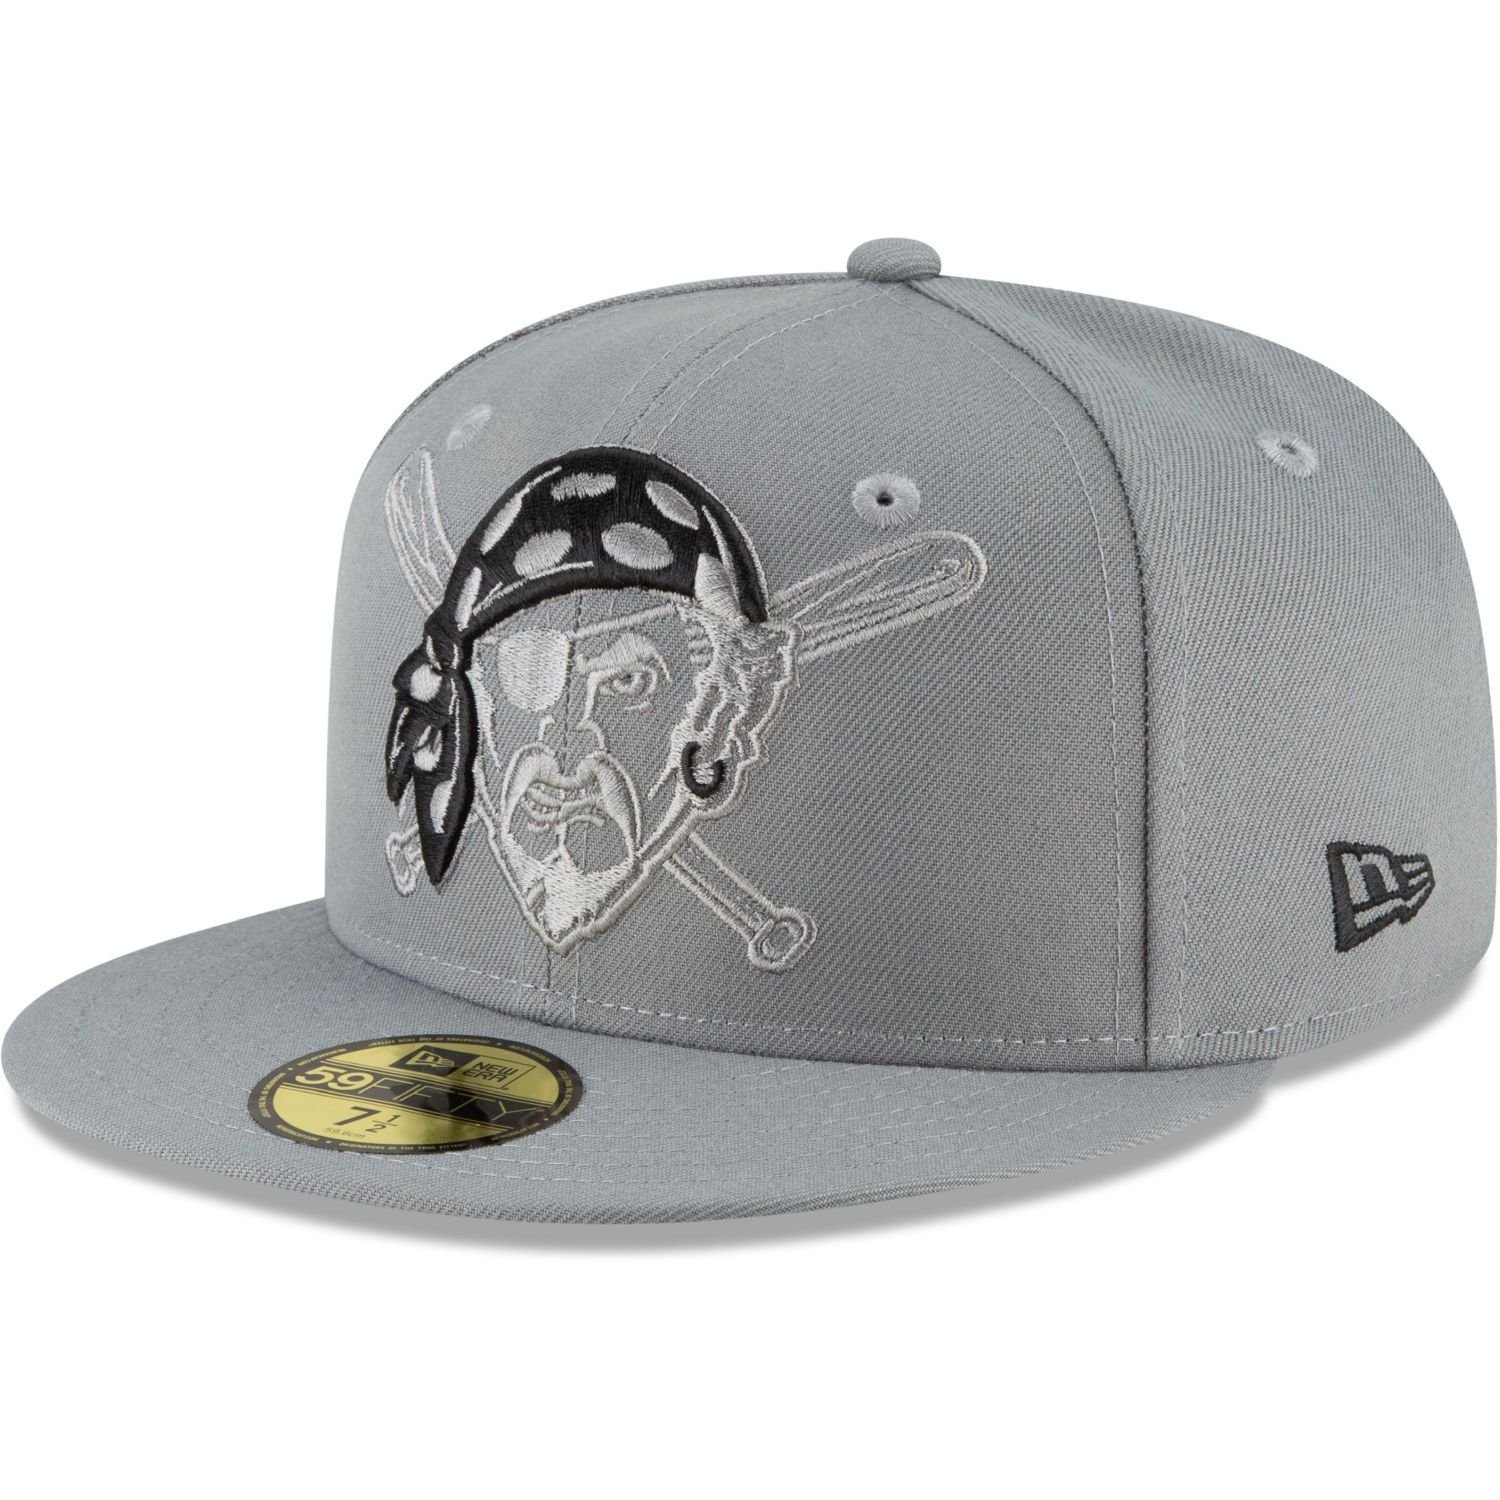 Cap Pittsburgh Cooperstown Pirates STORM Team MLB Era New Fitted GREY 59Fifty